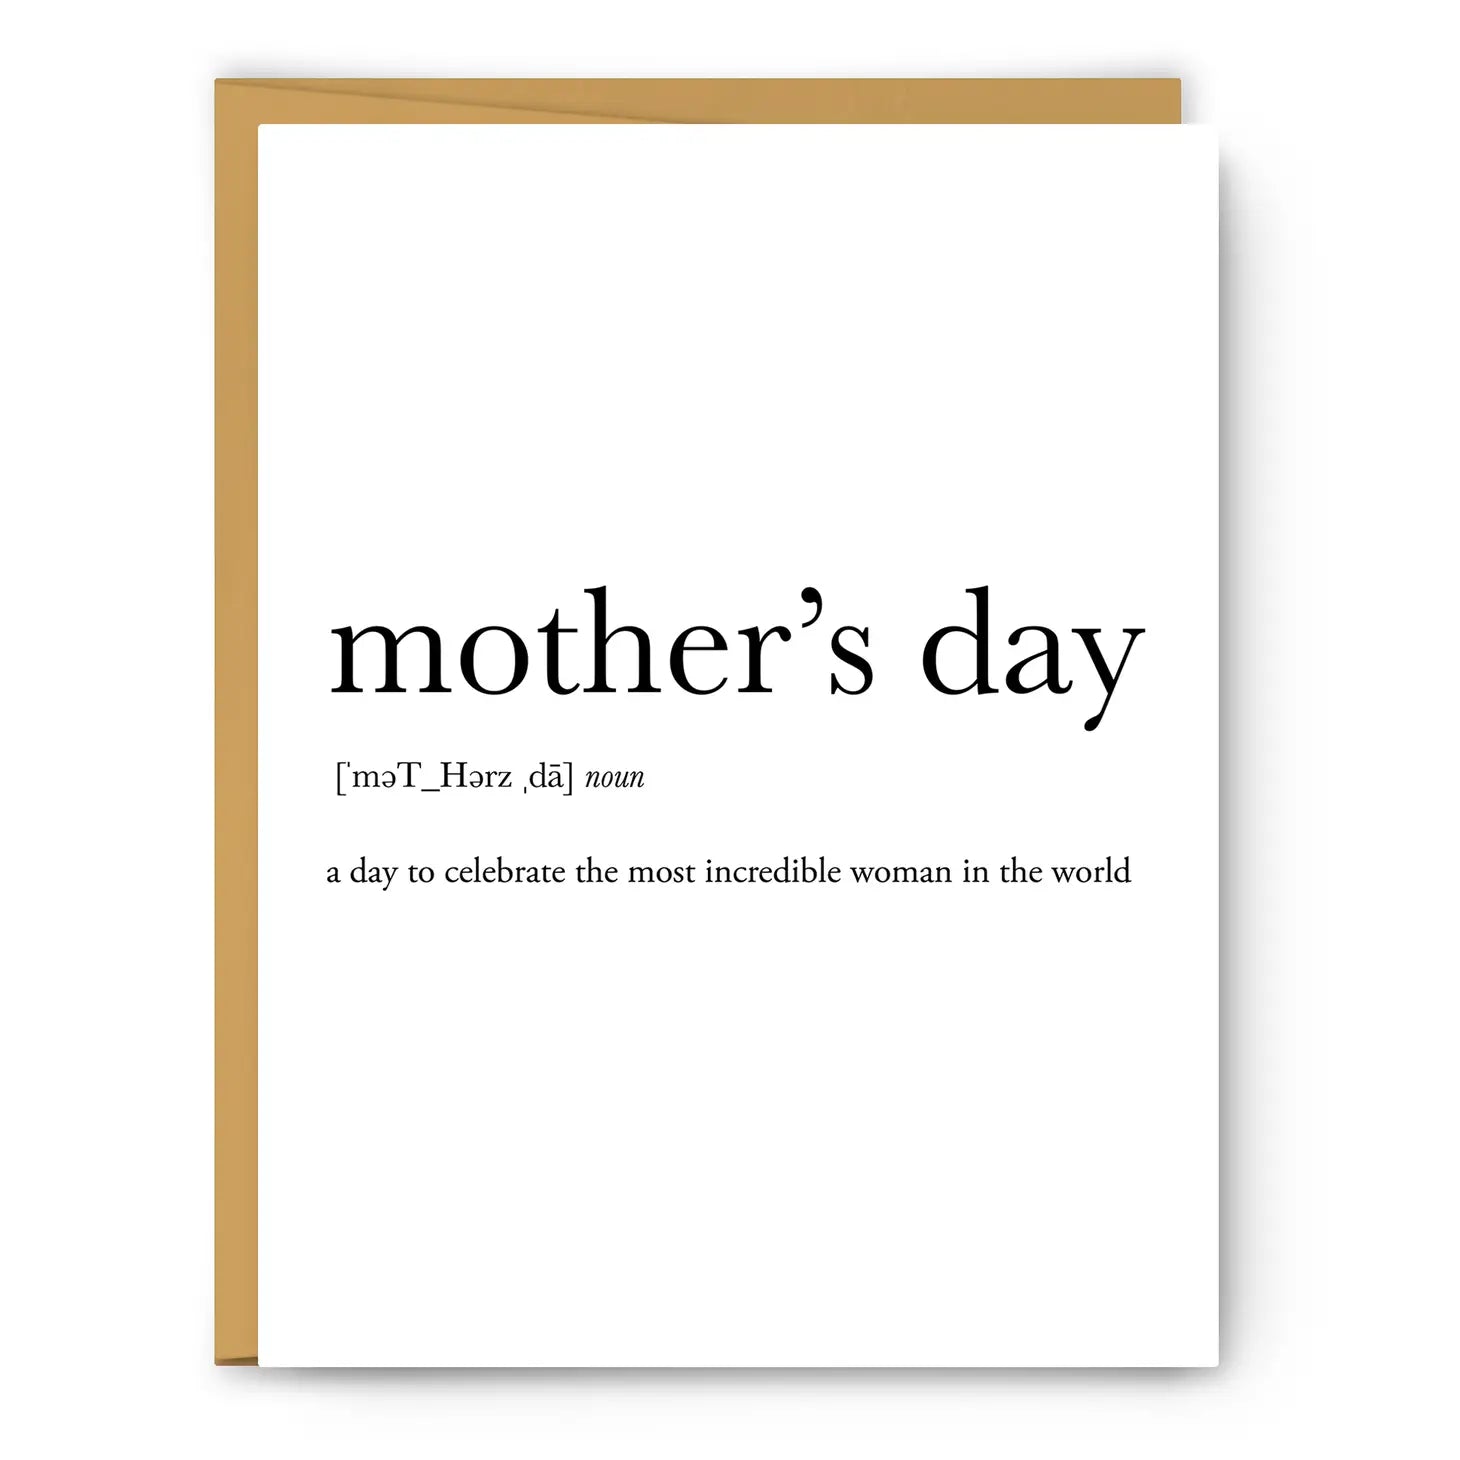 Definition Greeting Card: Mother's Day